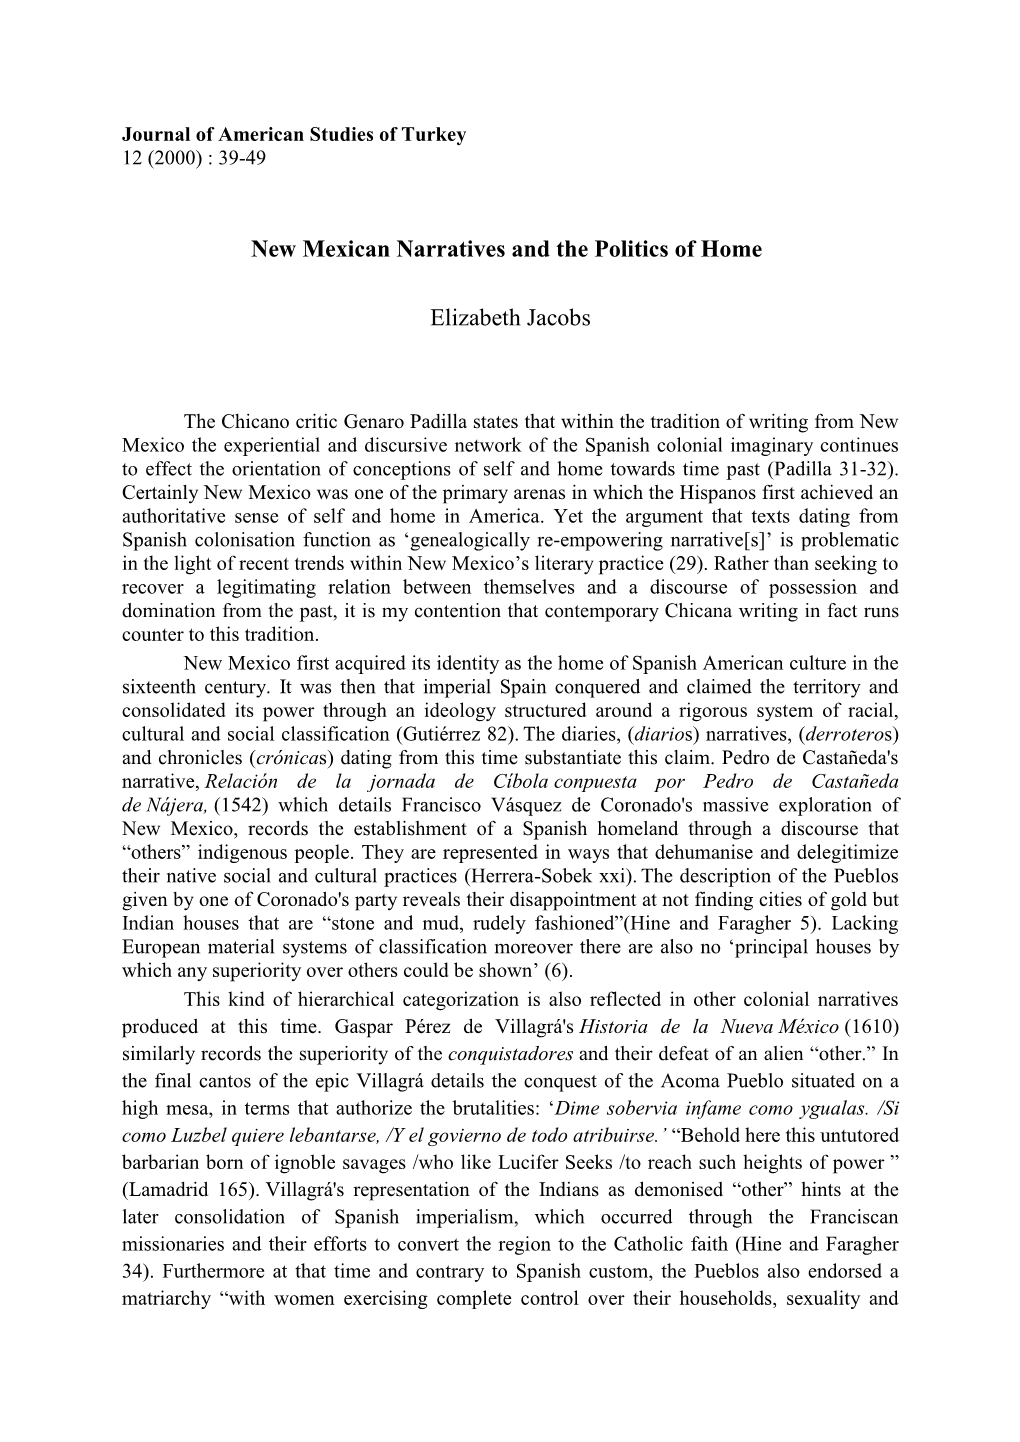 New Mexican Narratives and the Politics of Home Elizabeth Jacobs